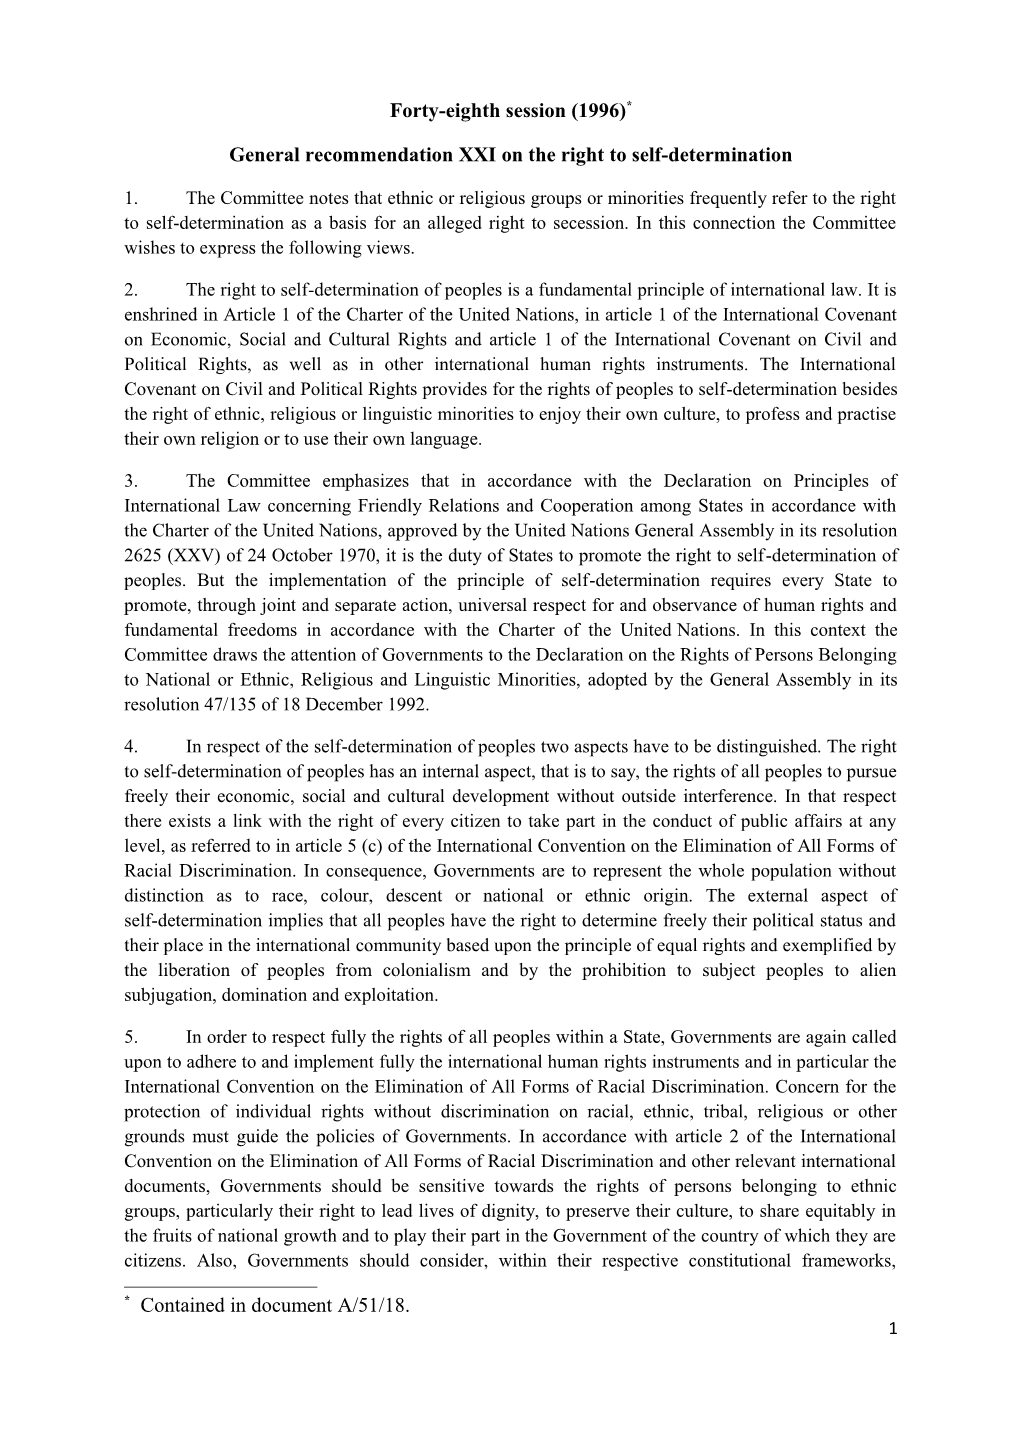 General Recommendation XXI on the Right to Self-Determination